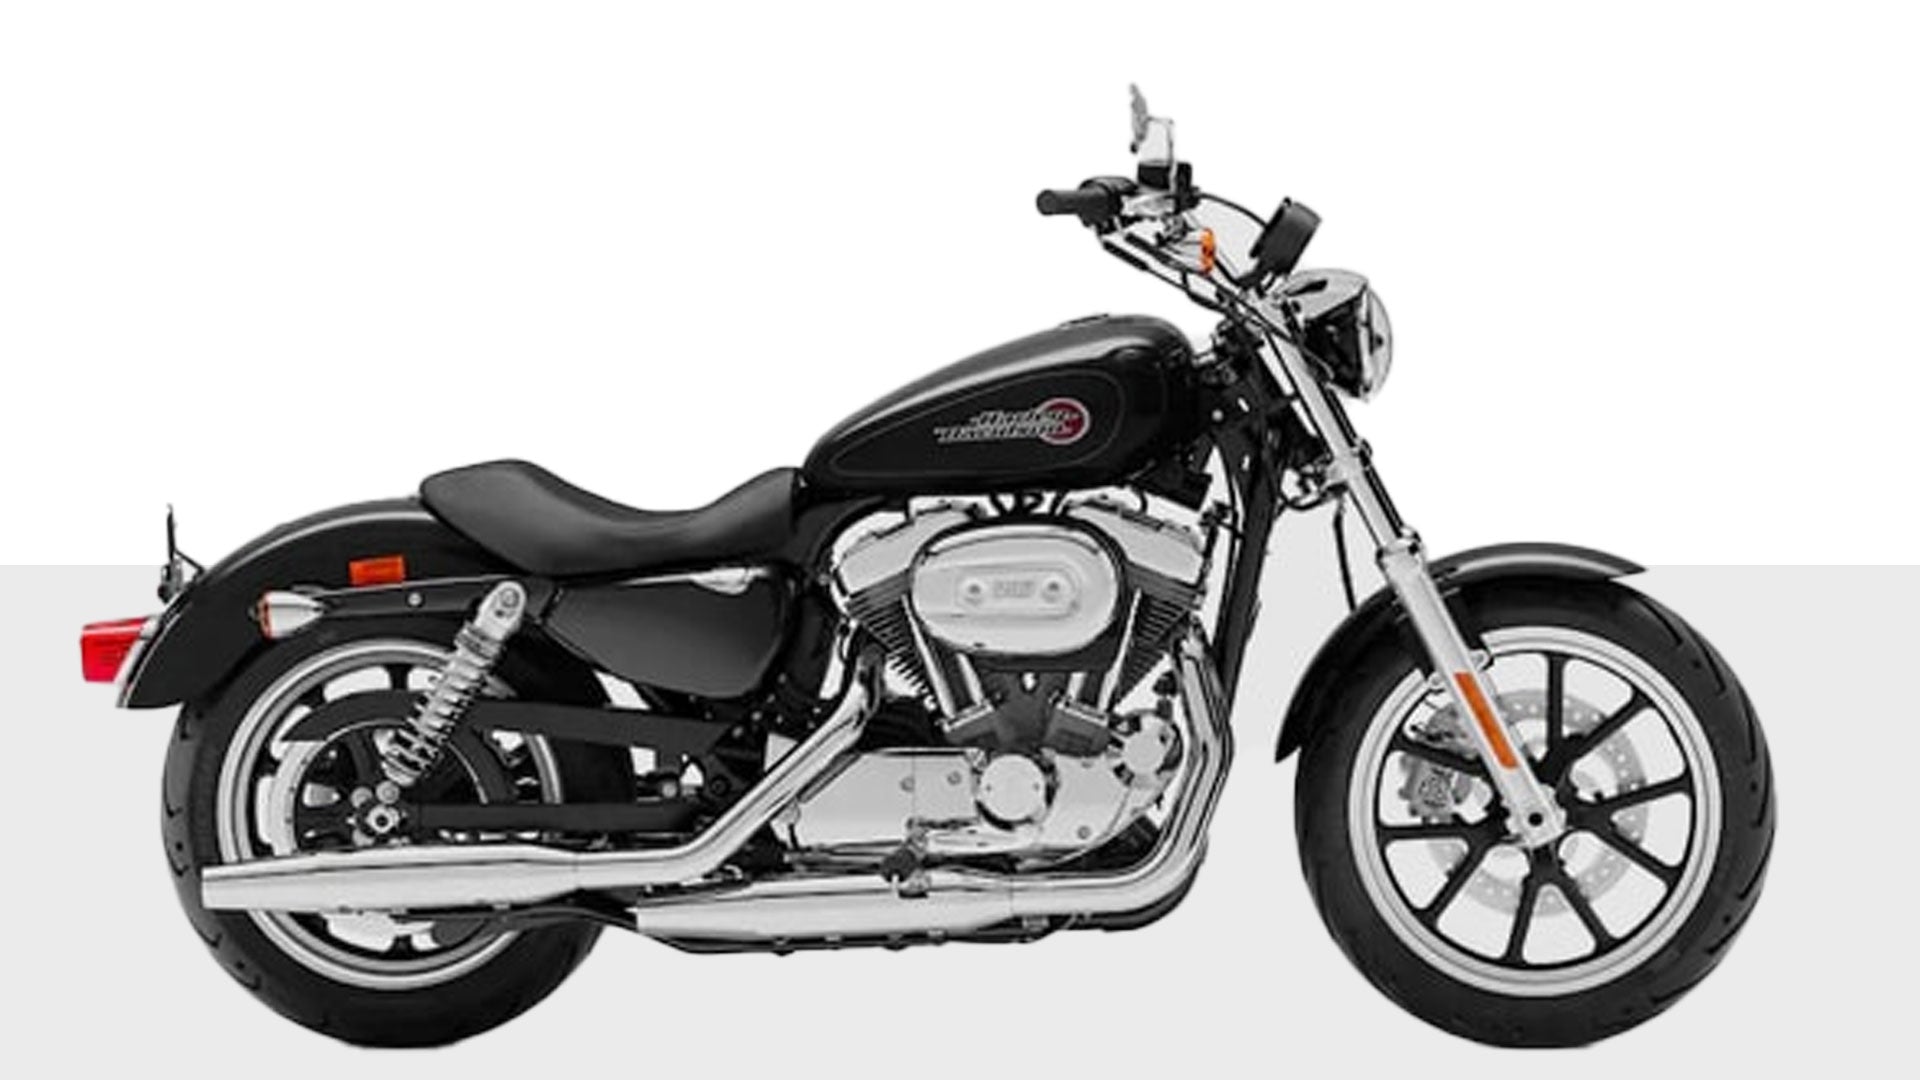 Harley vs Triumph: Comparing Iconic Motorcycle Brands